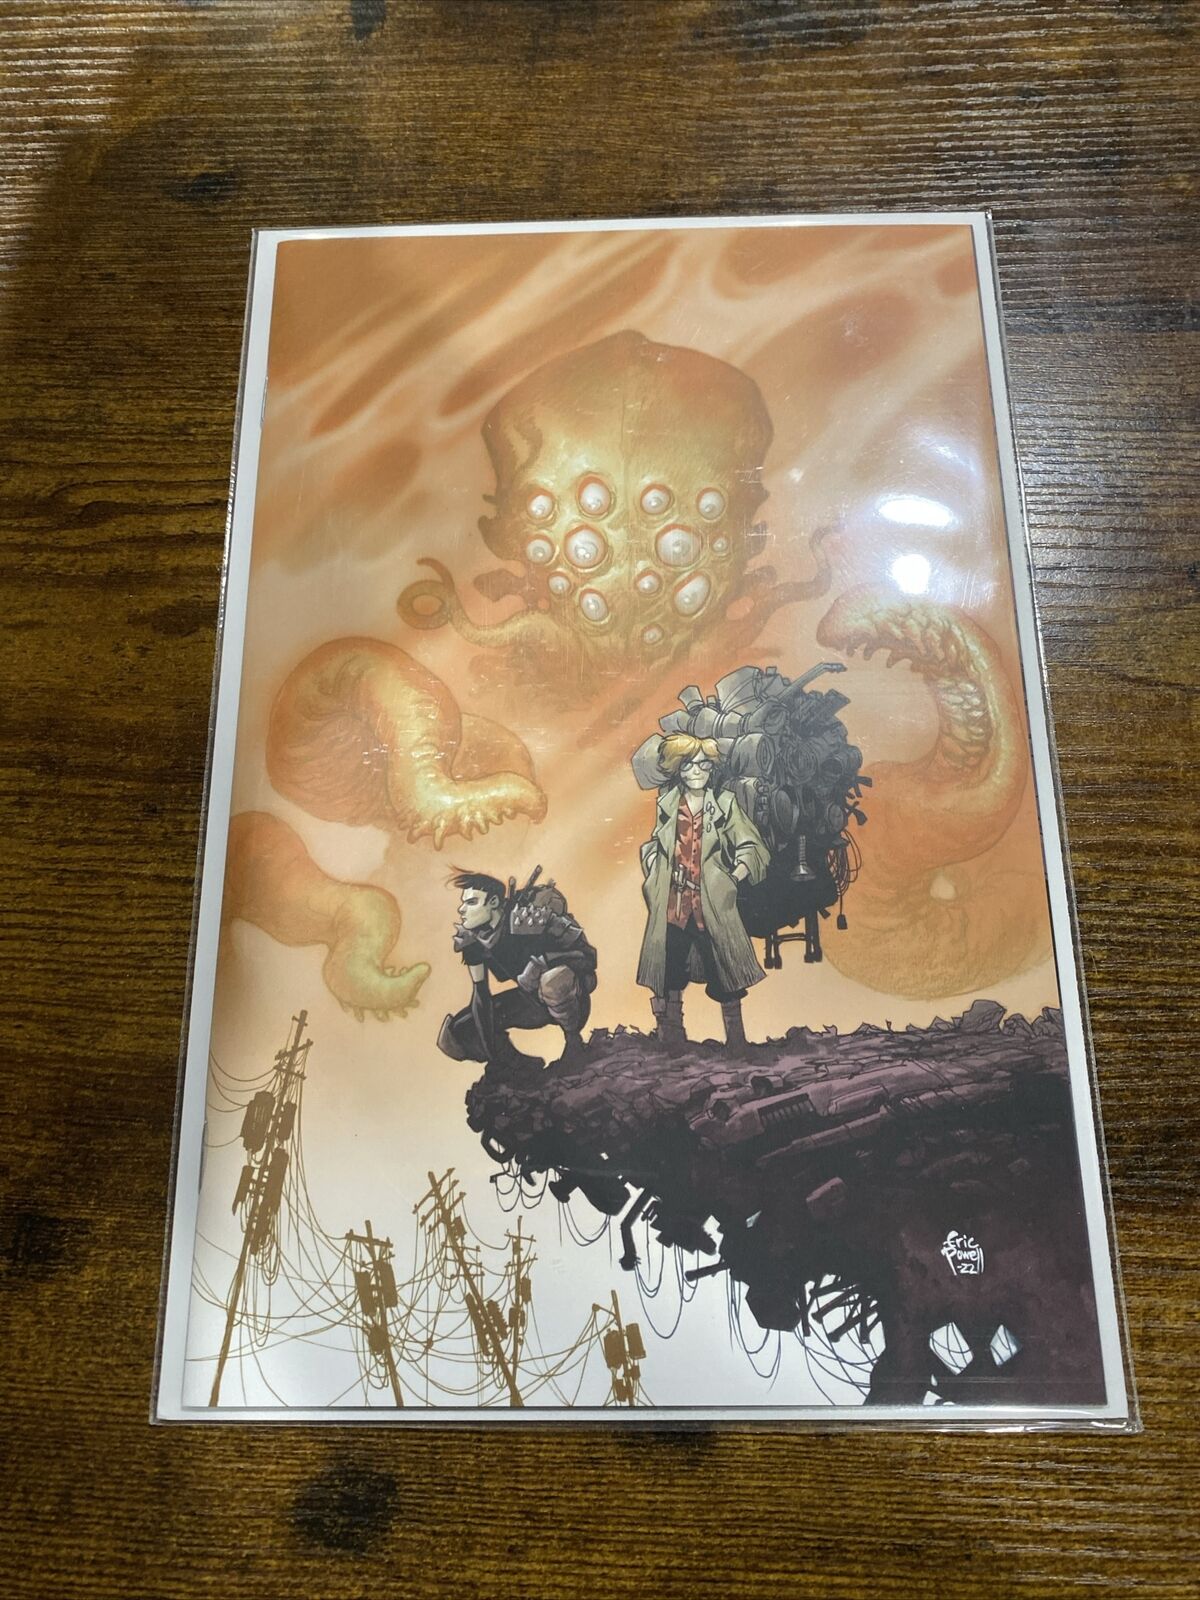 ONCE UPON A TIME AT END OF WORLD #1 * NM+ * Eric Powell Virgin Variant 500 COA